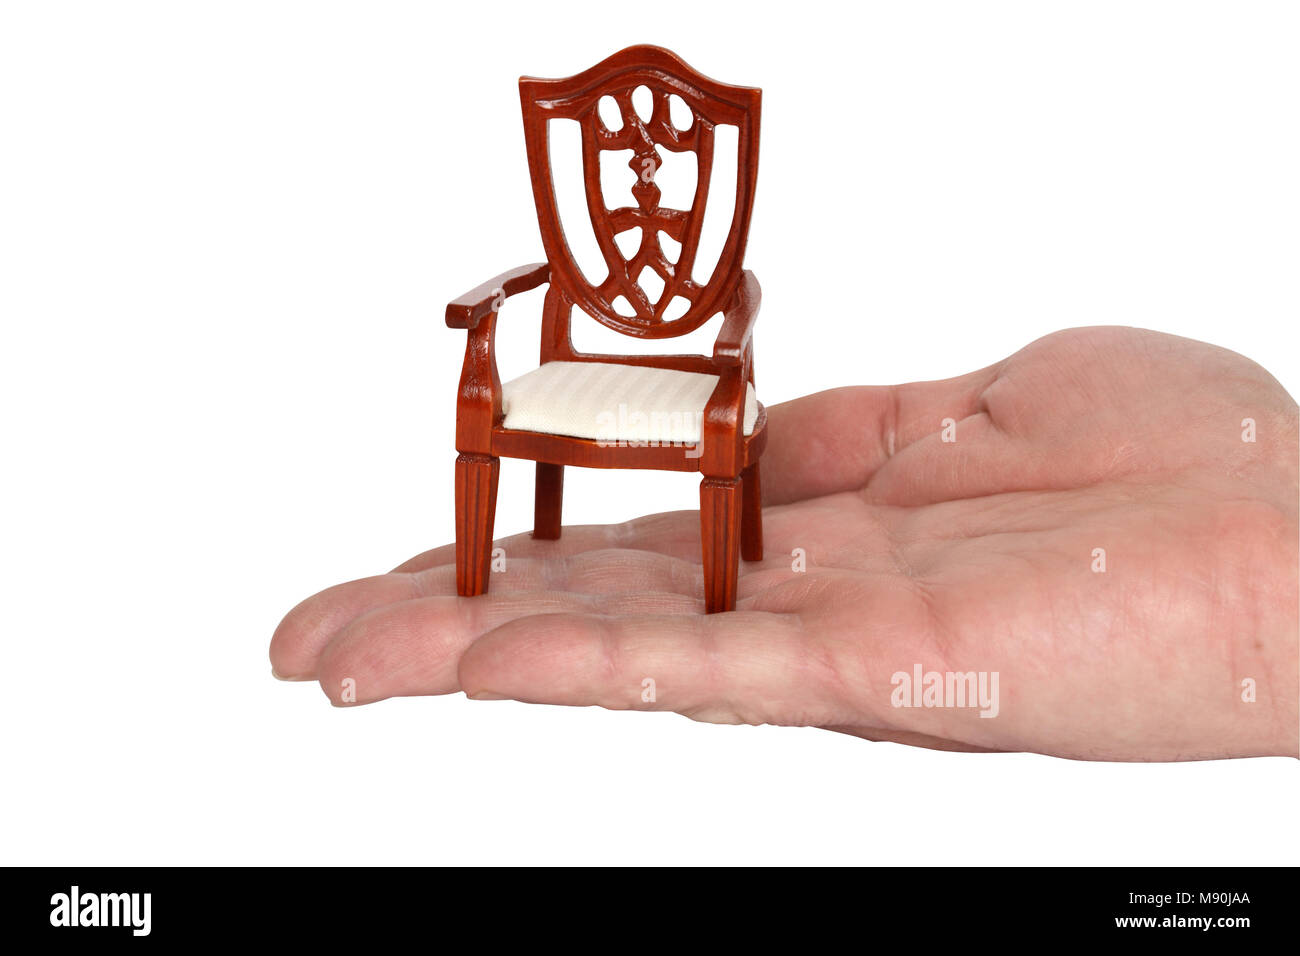 Miniature toy chair standing on human palm. Isolated with clipping path Stock Photo